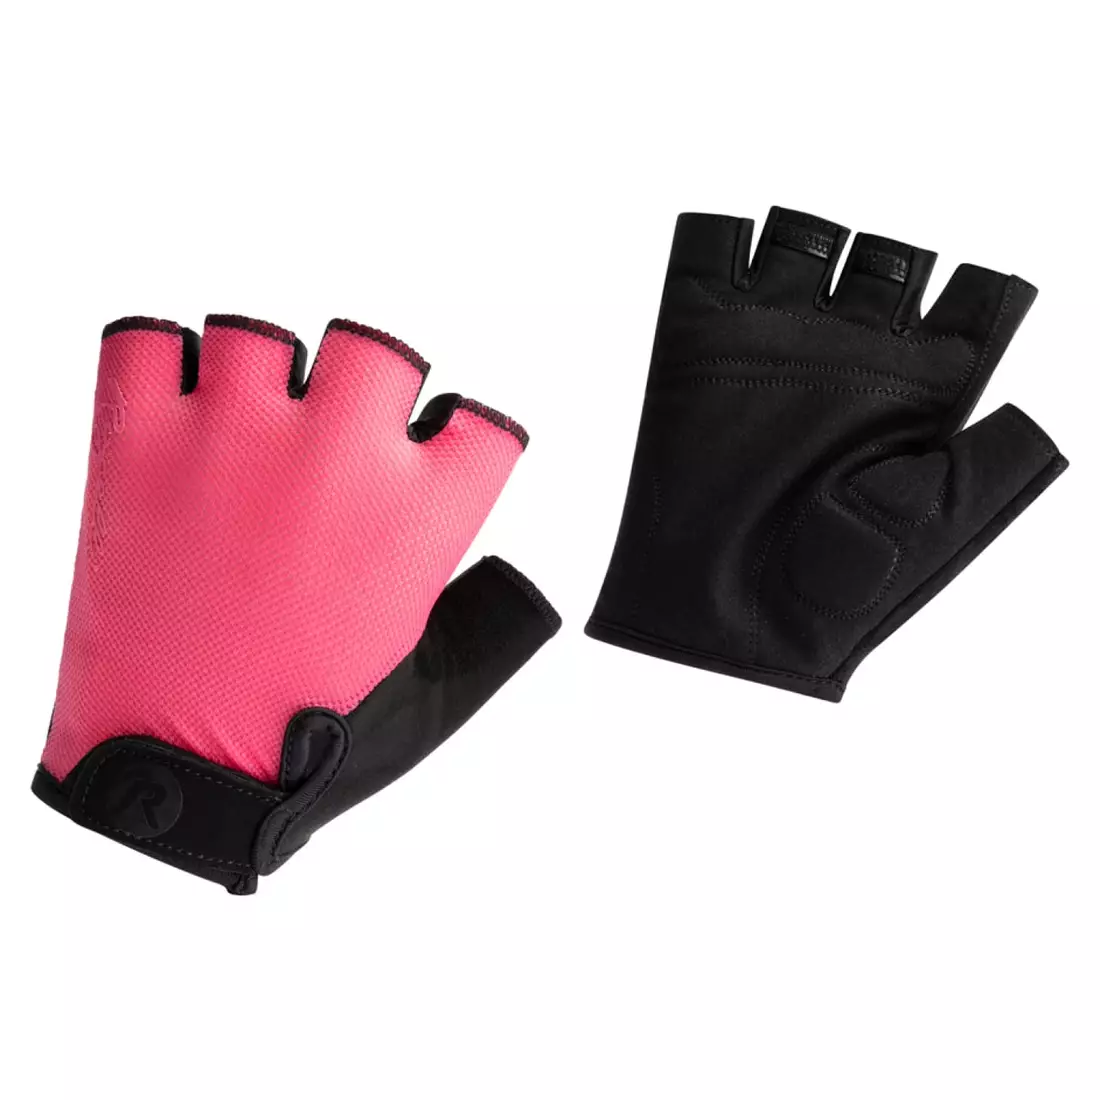 ROGELLI CORE Women's cycling gloves, pink